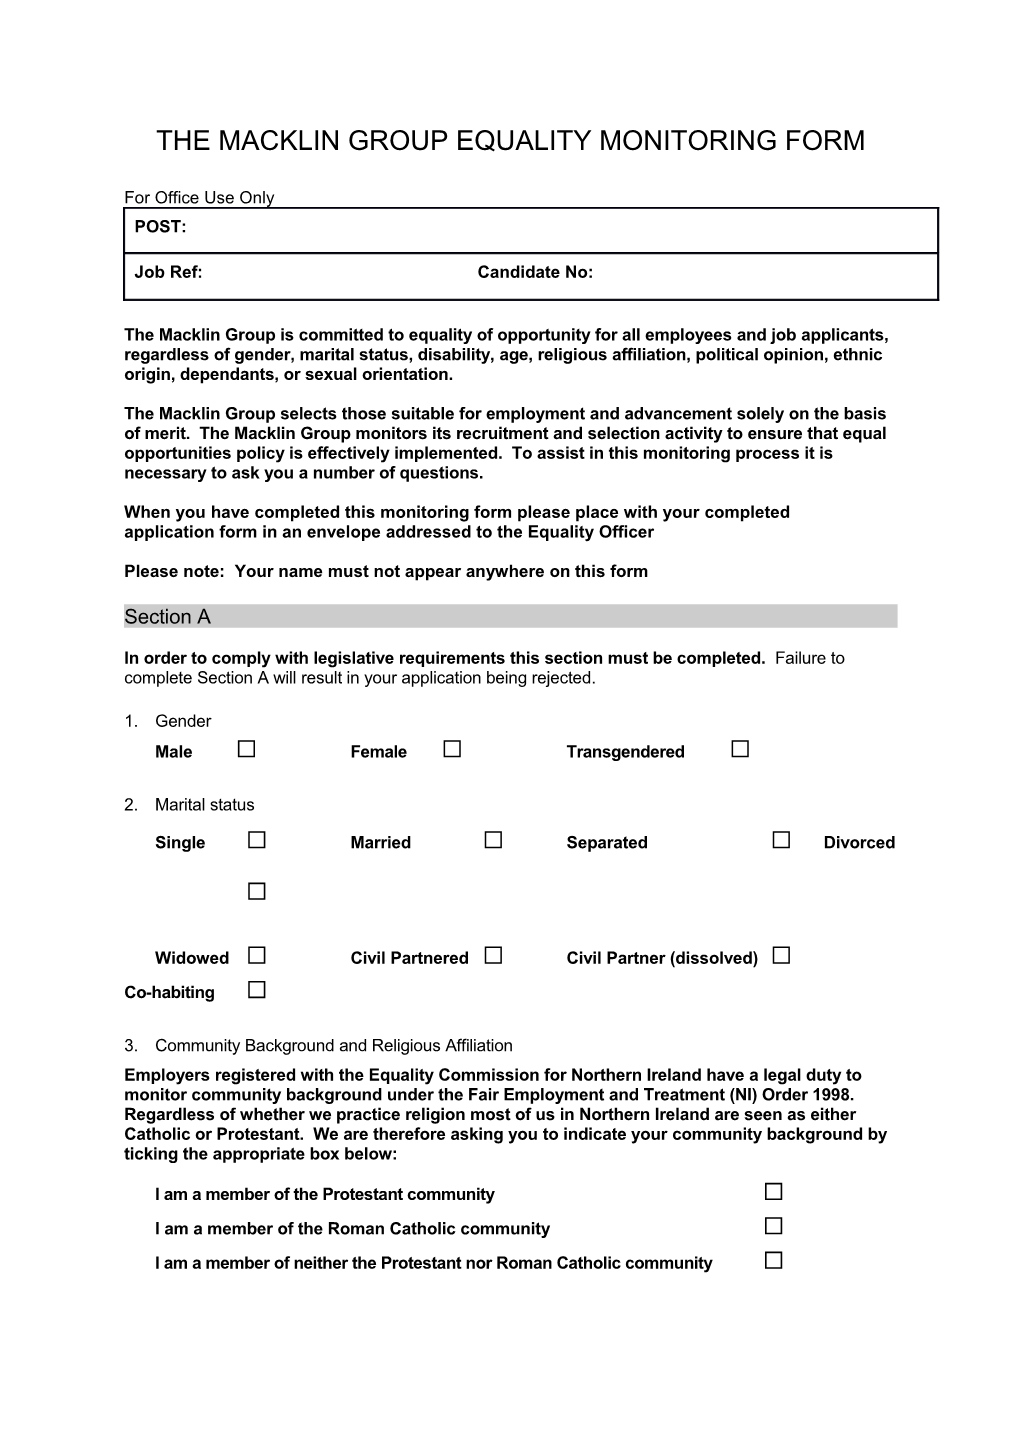 The Macklin Group Equality Monitoring Form